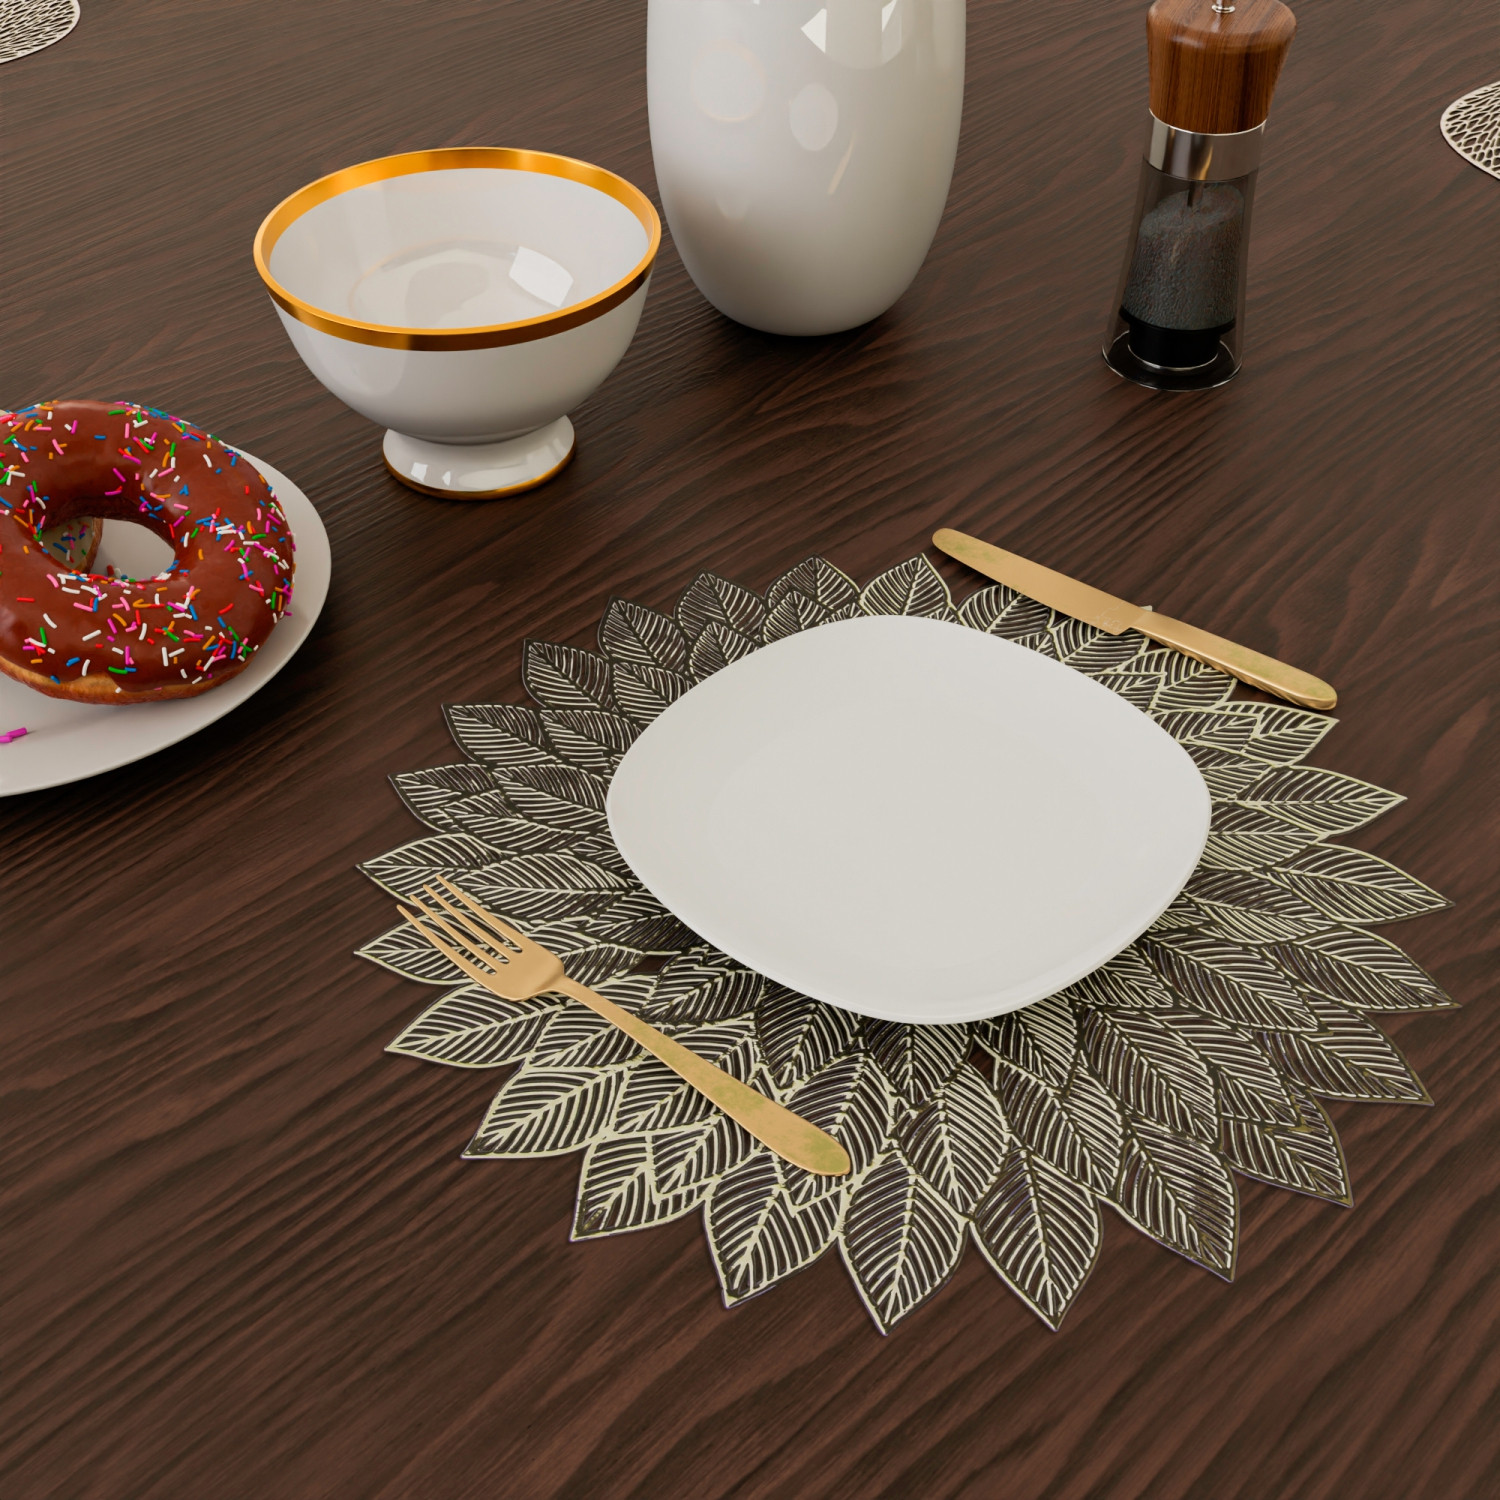 Kuber Industries Placemat | Placemats for Dining Room | Designer Table Mat Set | Placemats for Kitchen Table | Side Table Placemats | Round Flower Placemat |Golden